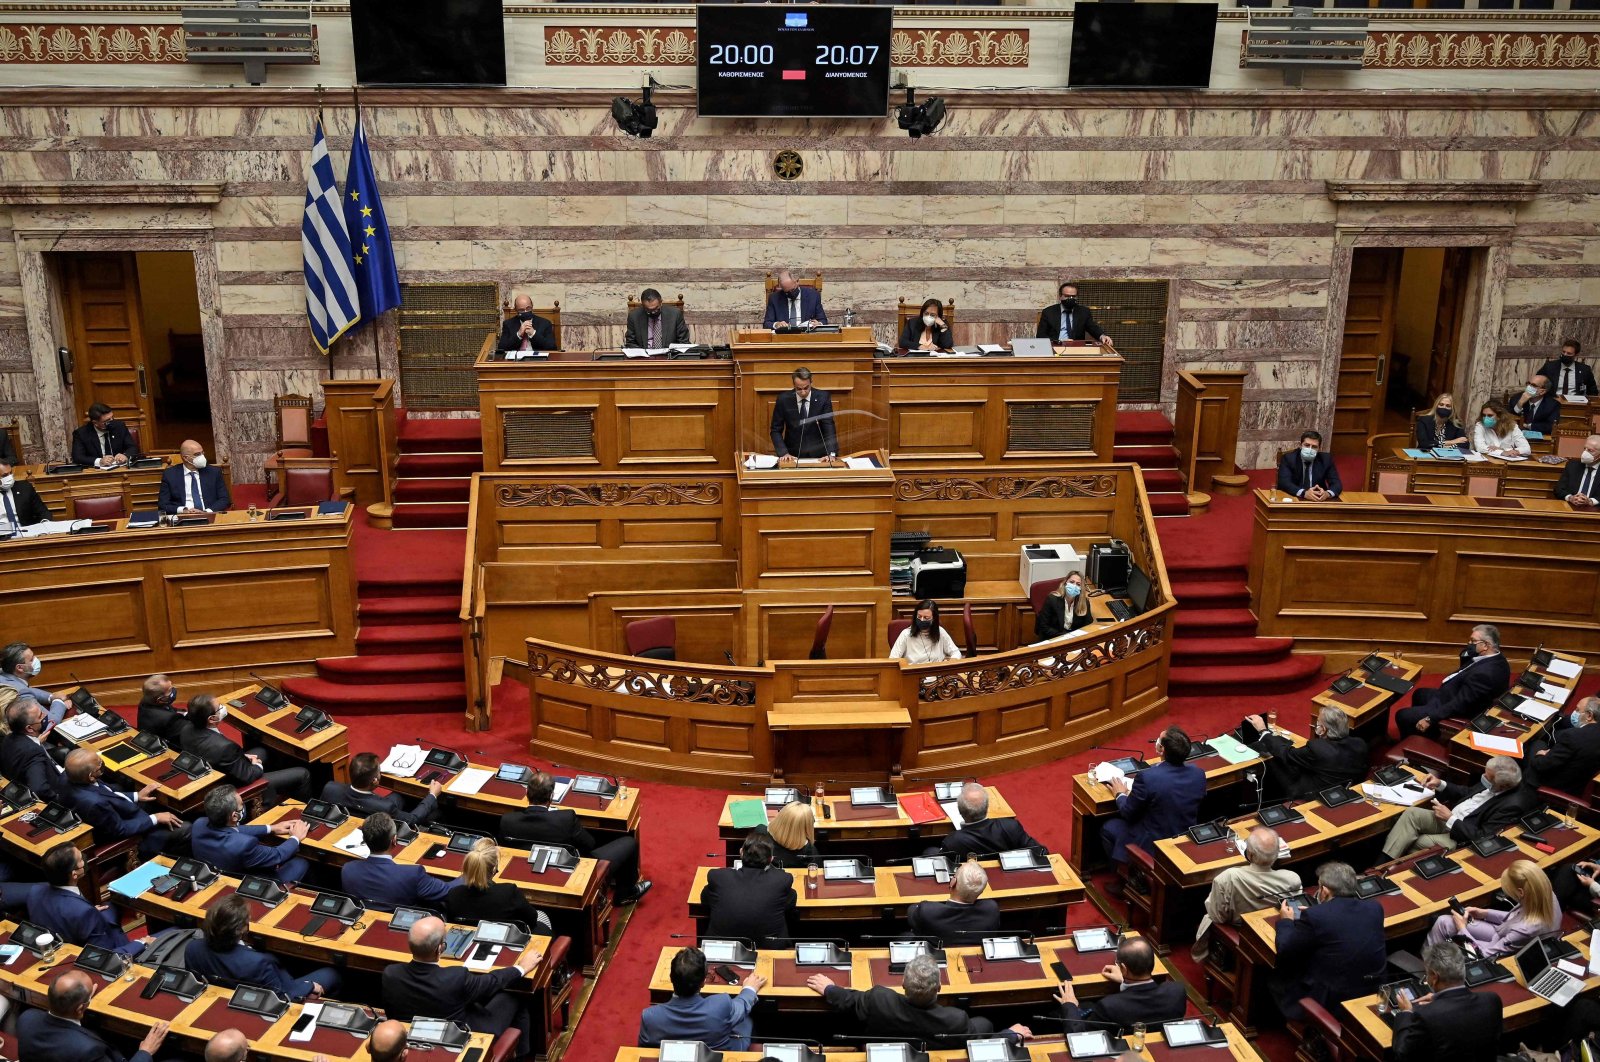 Greece's Prime Minister Kyriakos Mitsotakis (C) addresses the Greek Parliament during a session to ratify a defense deal with France, in Athens, Greece, Oct. 7, 2021. (AFP Photo)